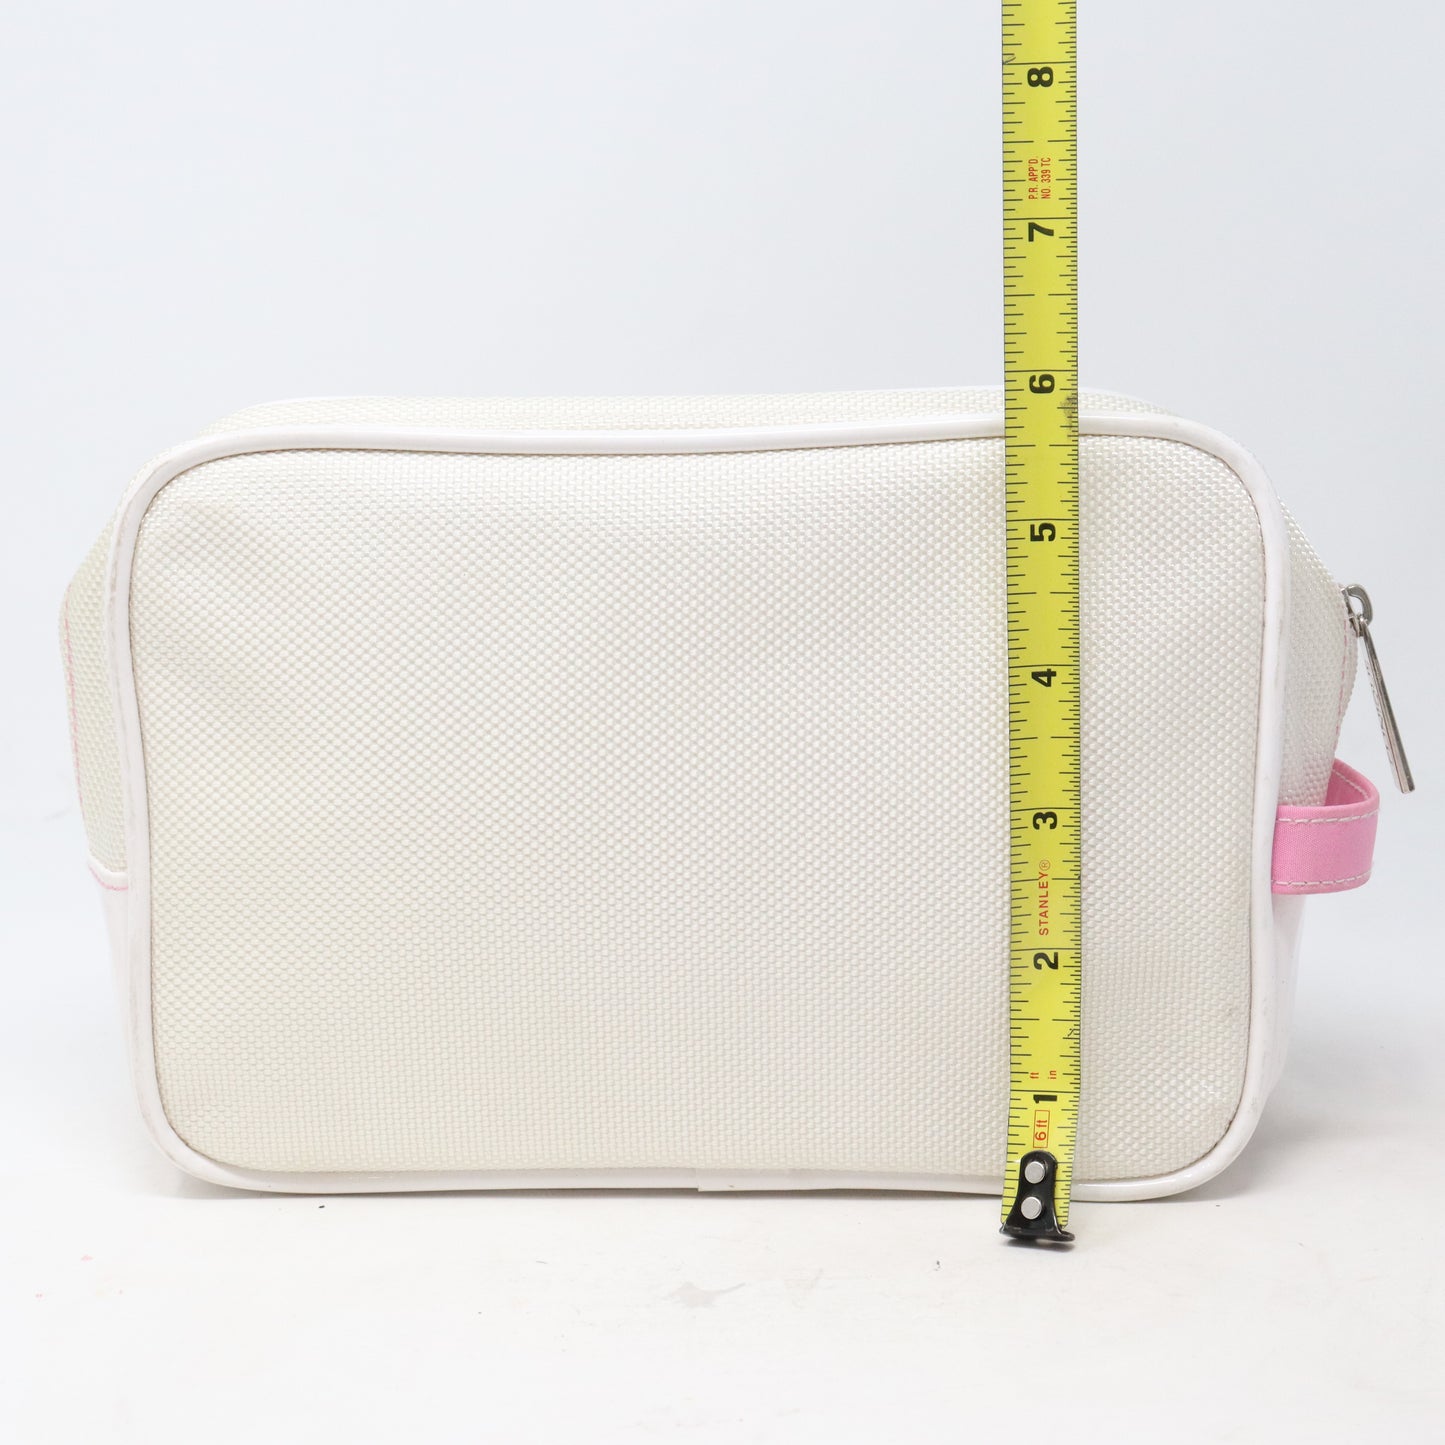 Clinique White And Pink Cosmetic Bag  / New